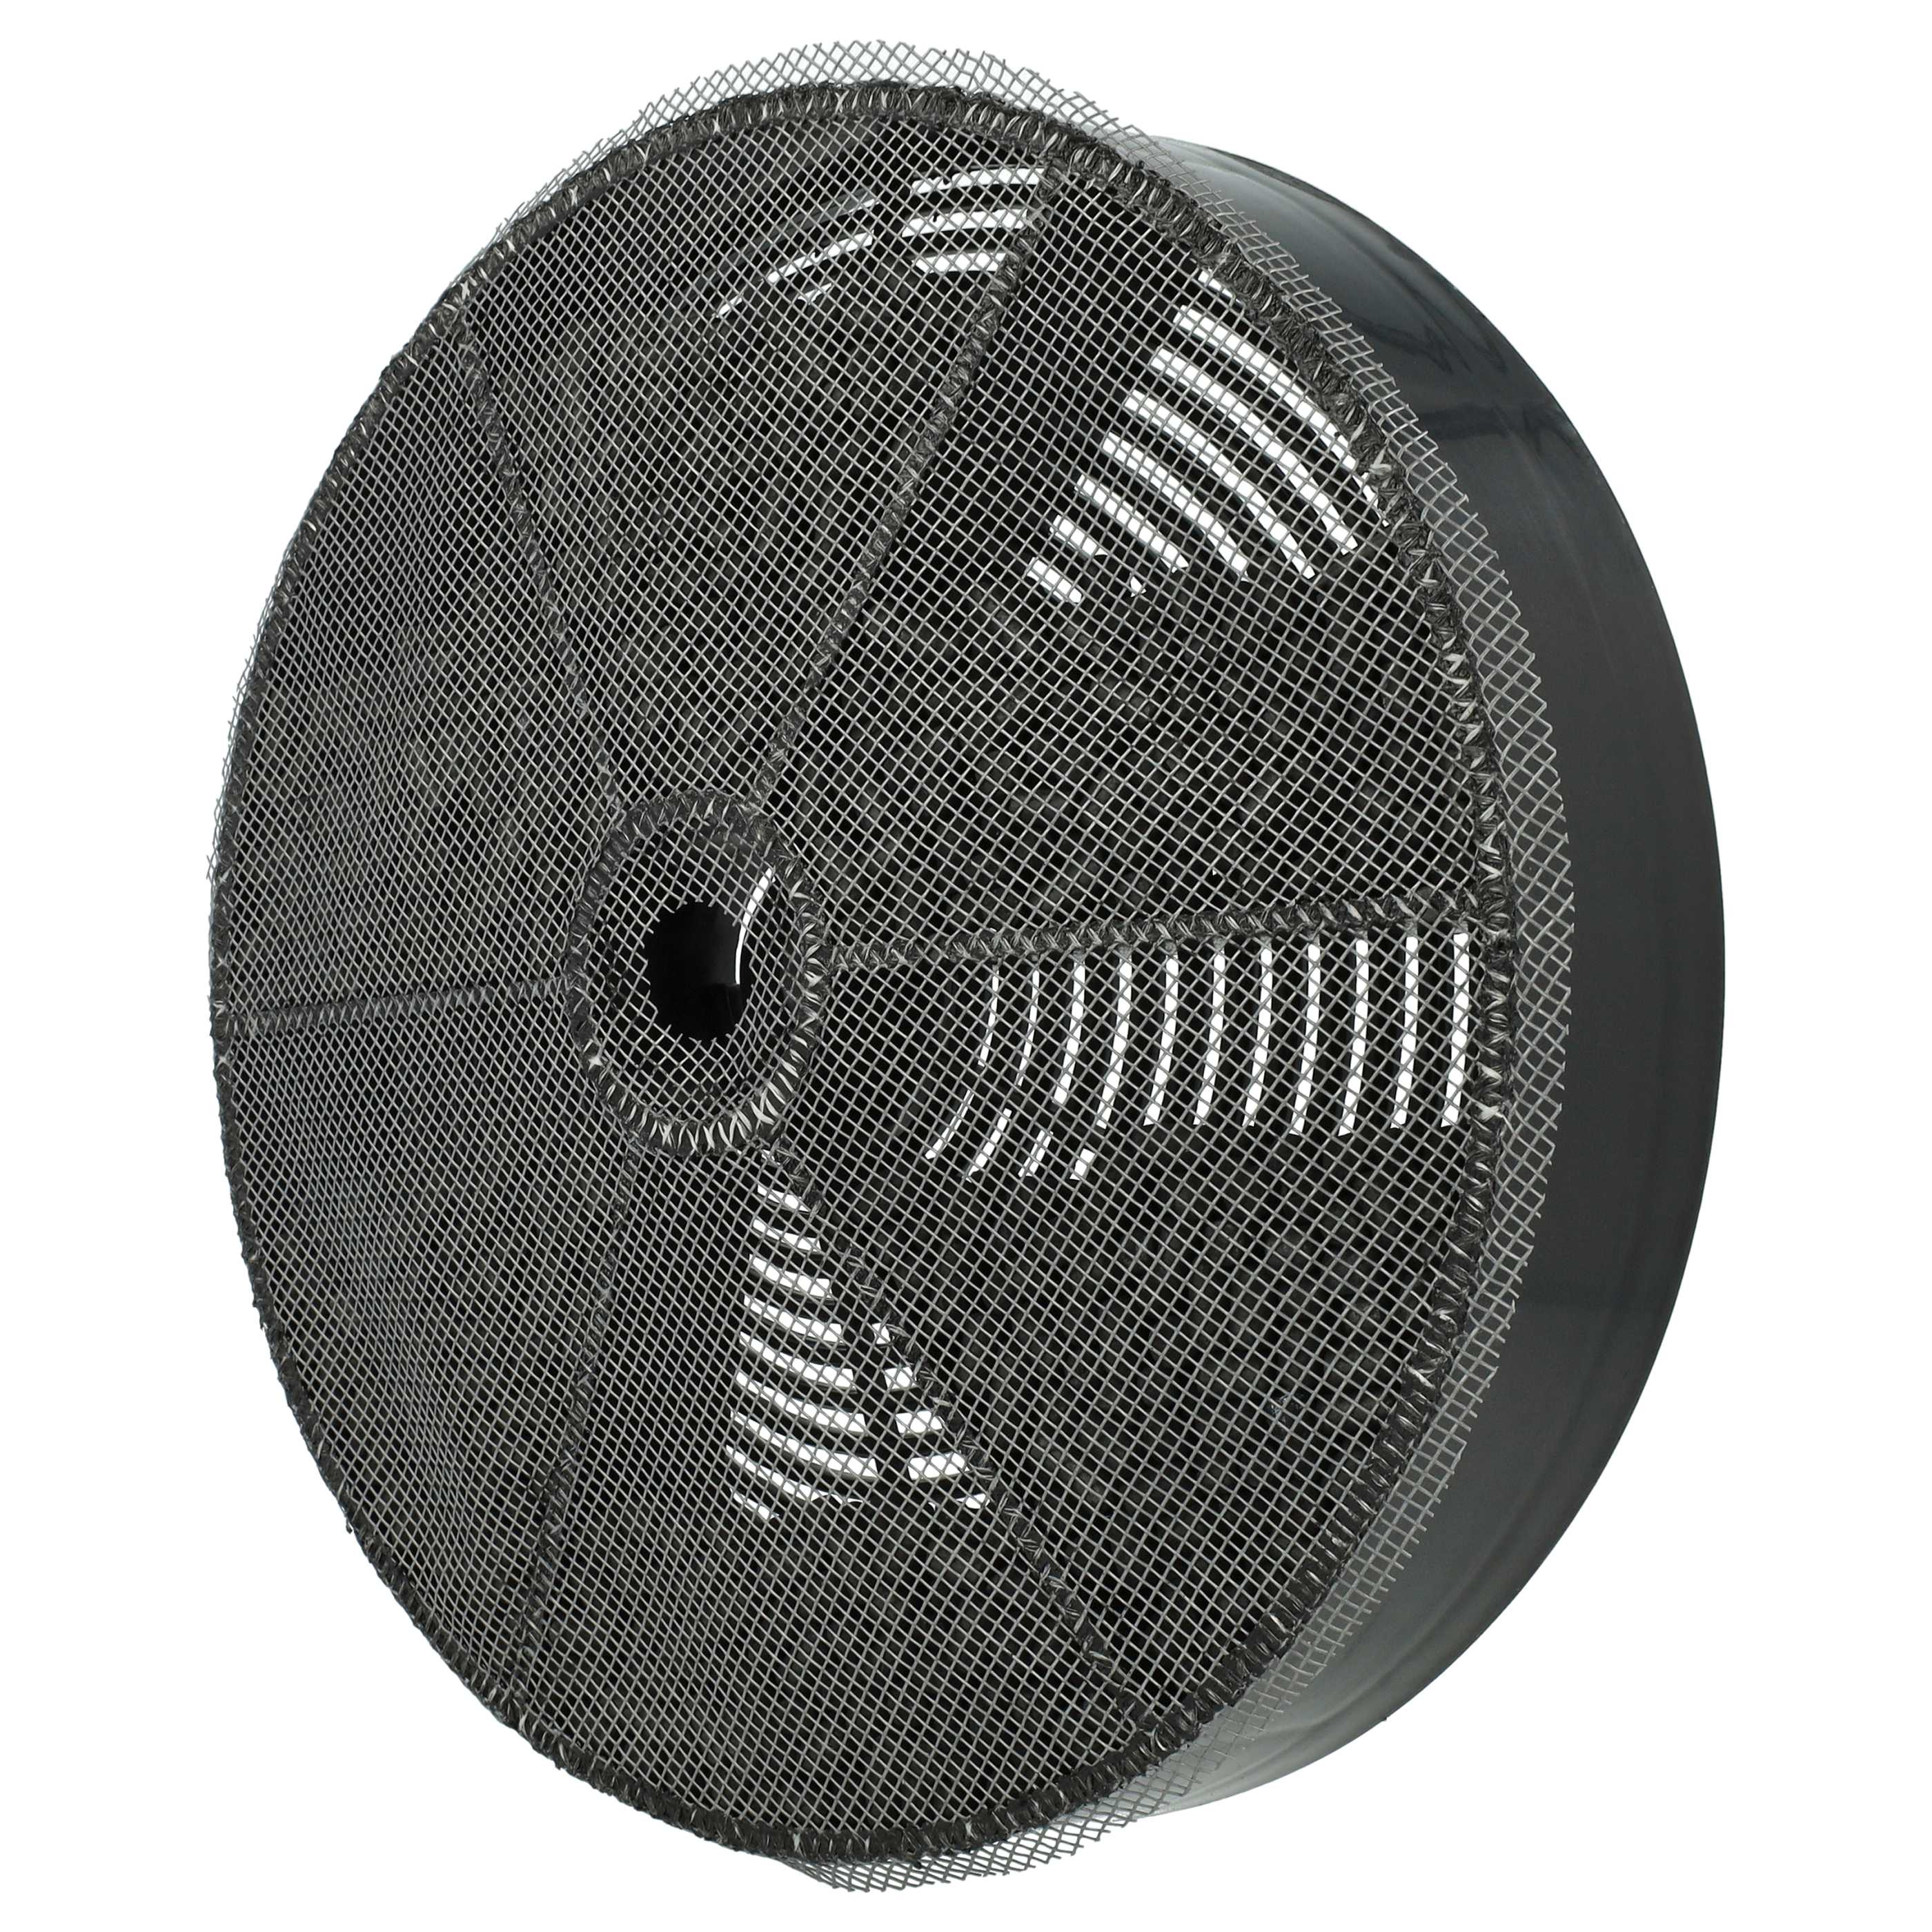 Activated Carbon Filter as Replacement for 50246307008 for Zanussi Hob etc. - with Mesh Cover